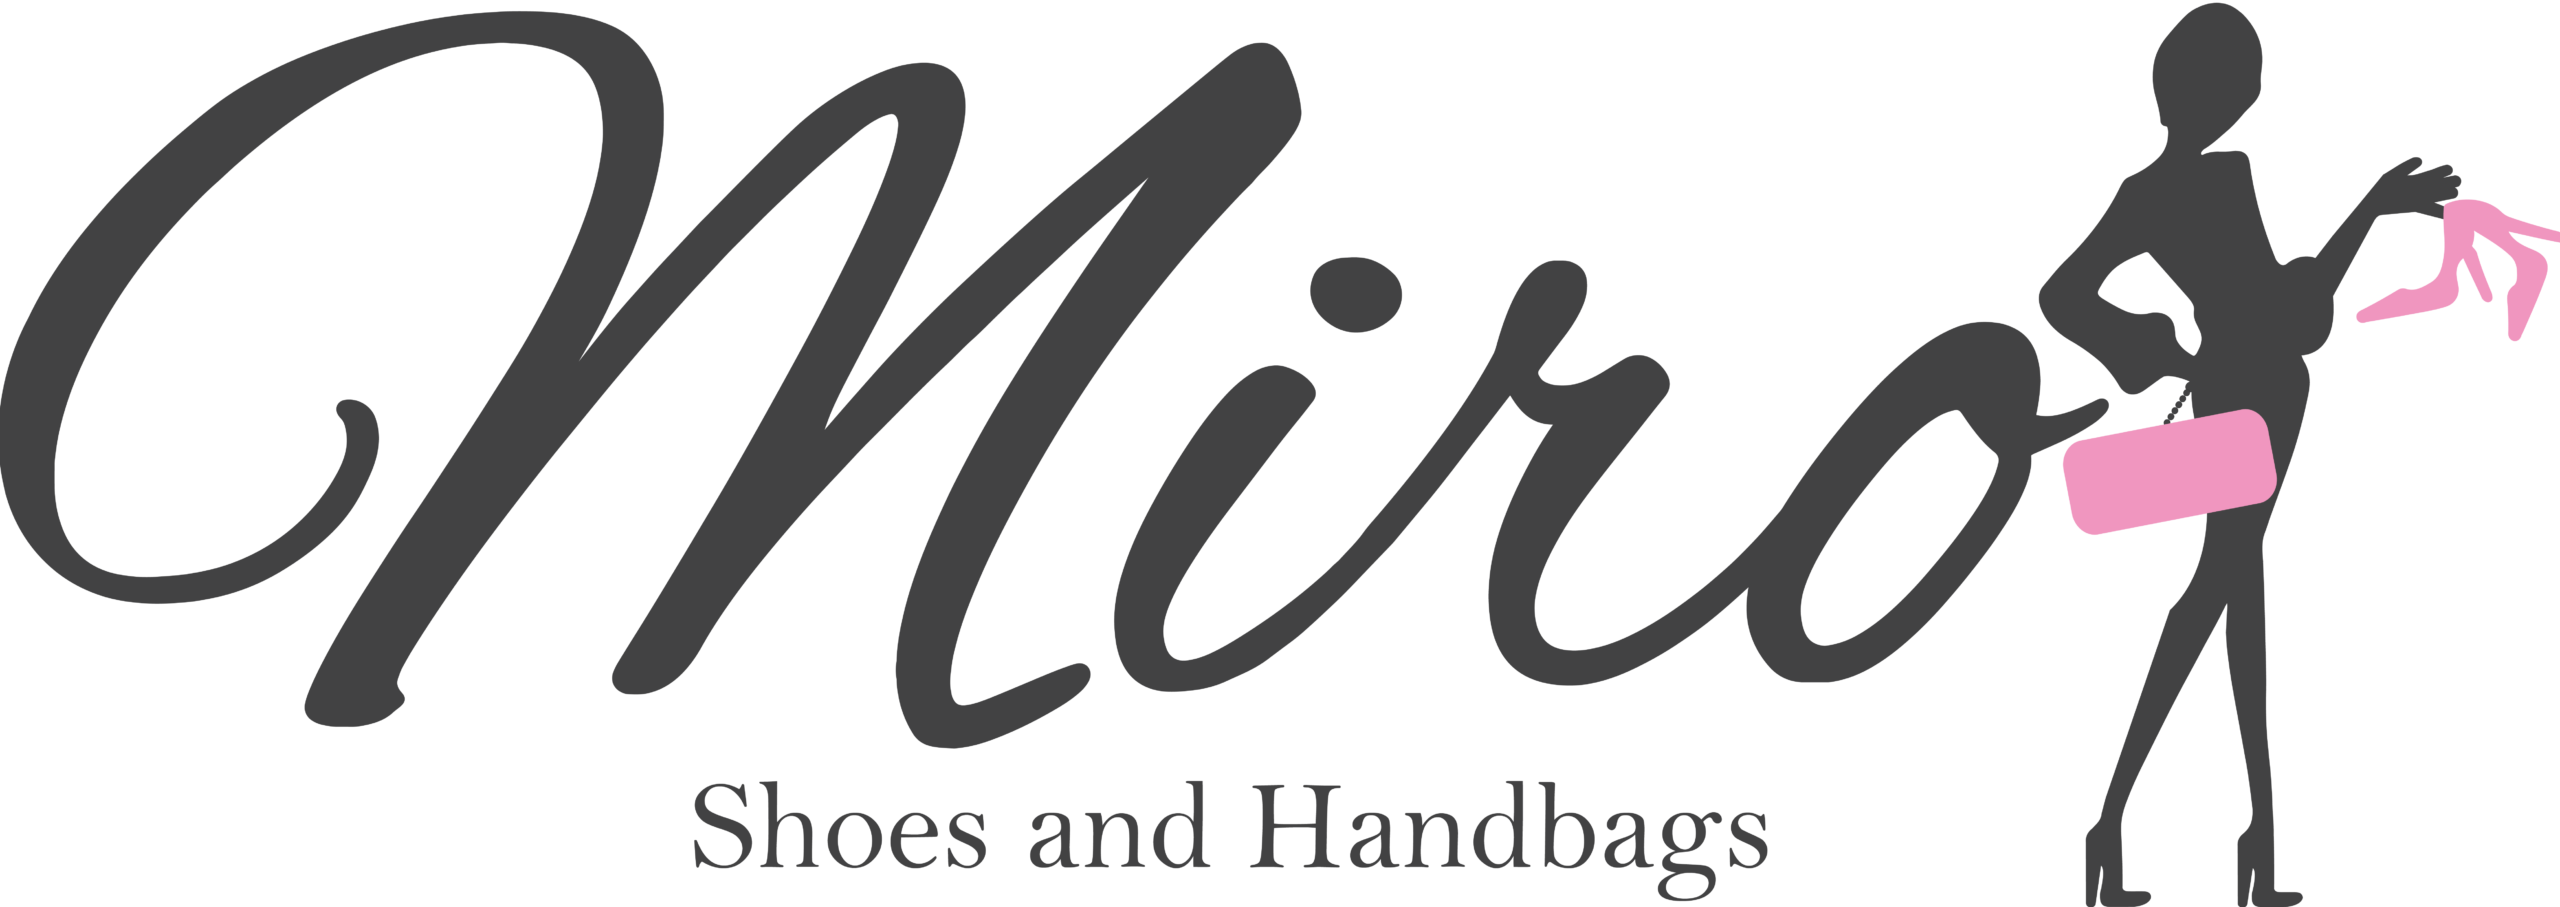 Digital & Branding Solutions for Retailers - Miro Shoes and Handbags New Logo - Branding Design By The Digital Bakery Creative Agency in Dundalk Louth